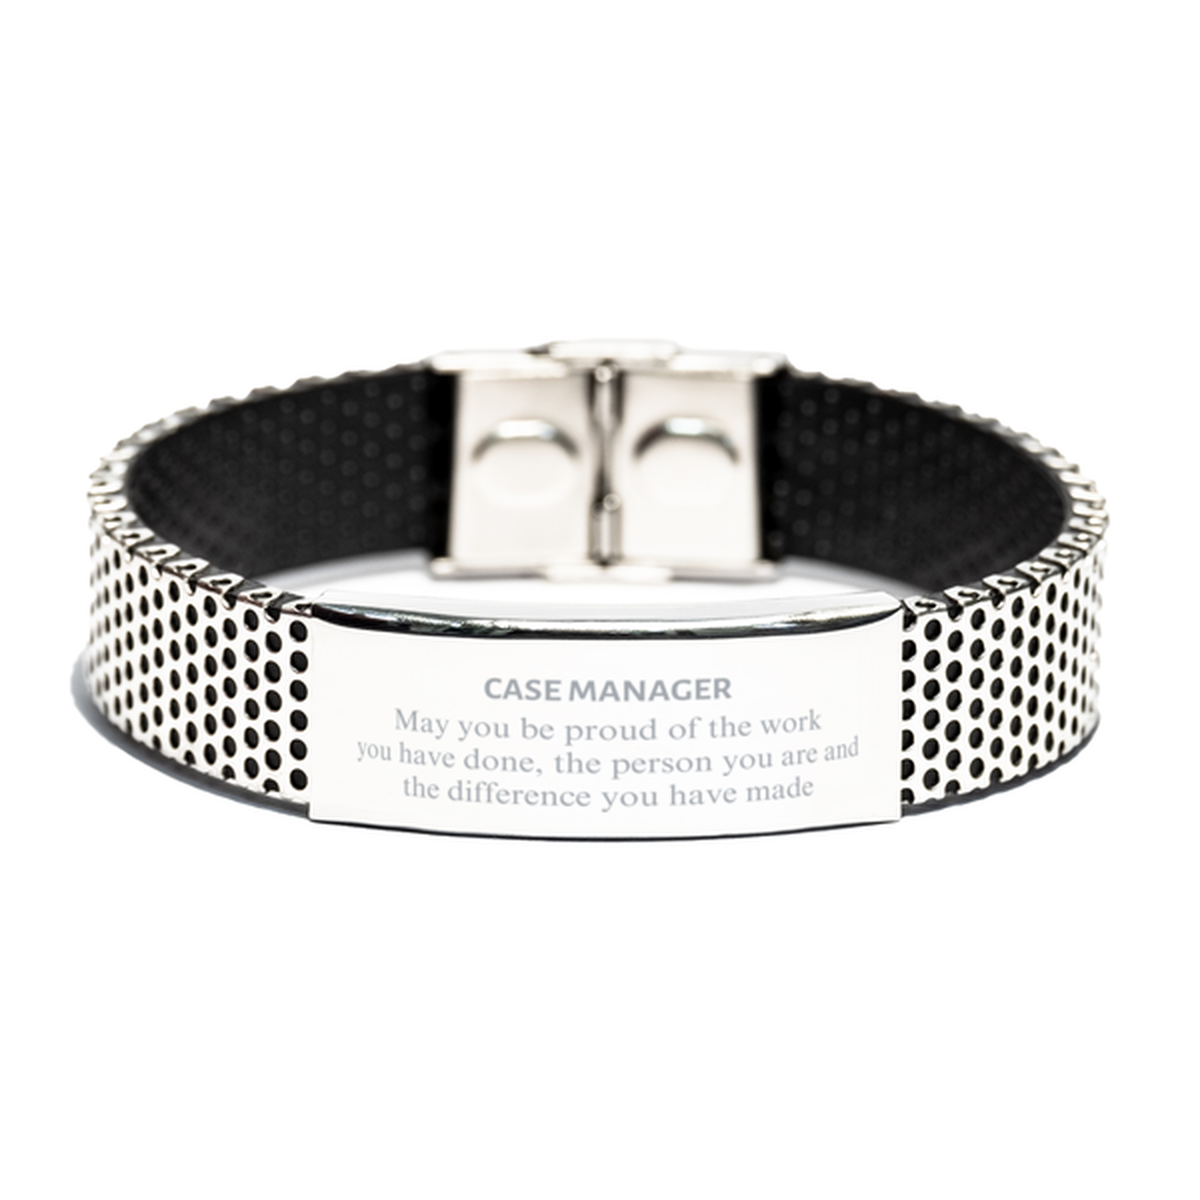 Case Manager May you be proud of the work you have done, Retirement Case Manager Stainless Steel Bracelet for Colleague Appreciation Gifts Amazing for Case Manager